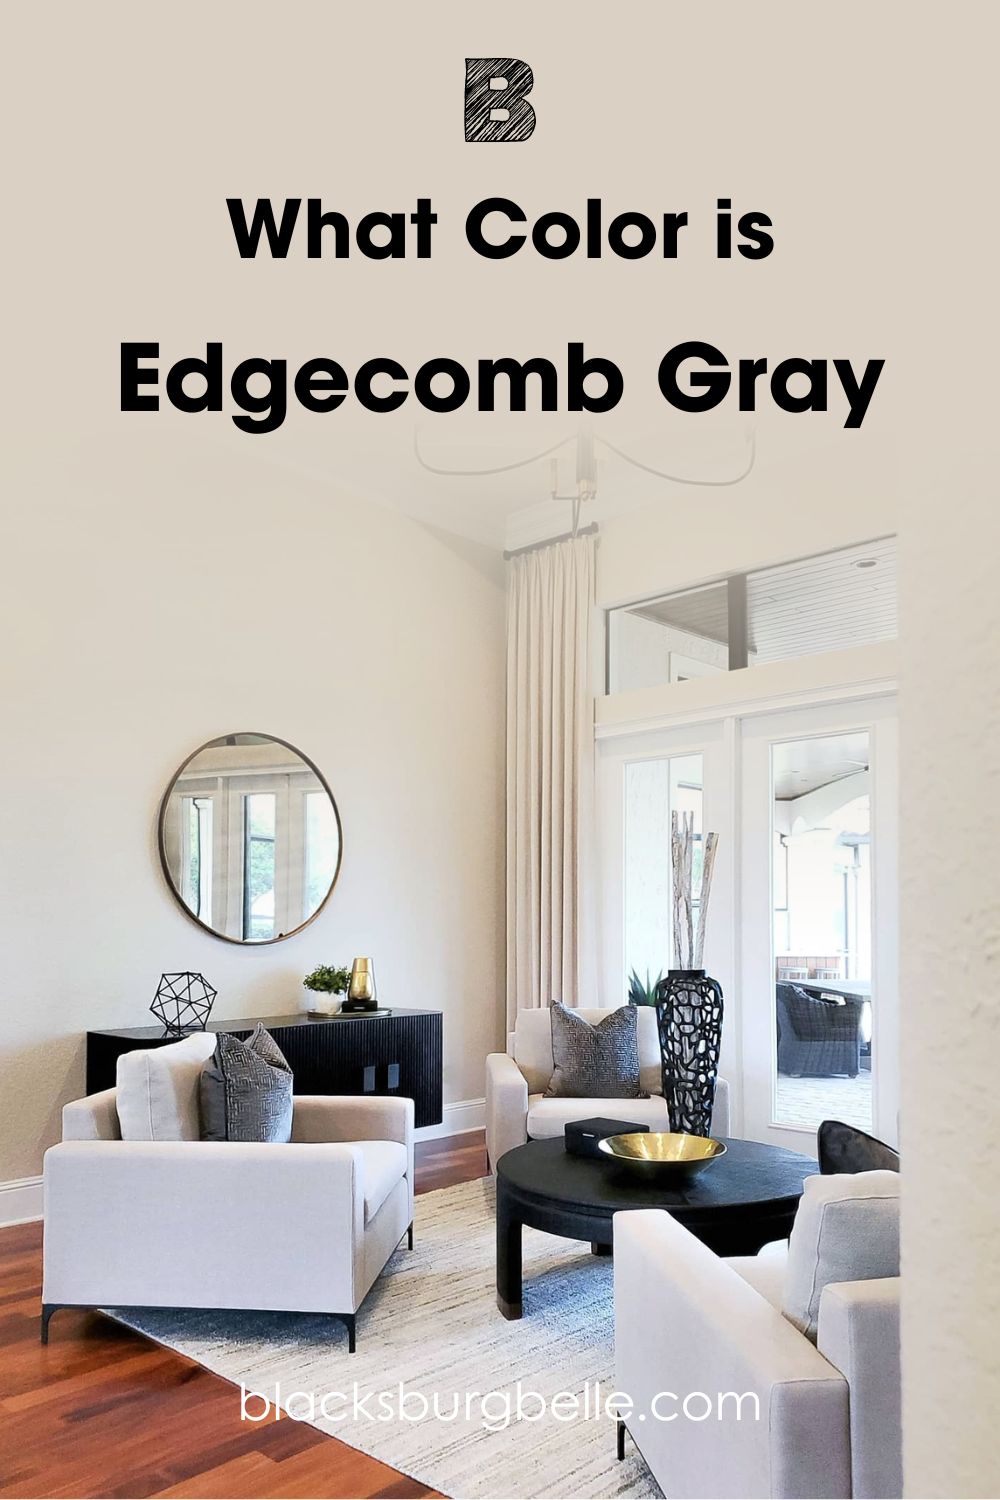 Here, Edgecomb Gray features in the chic sitting room